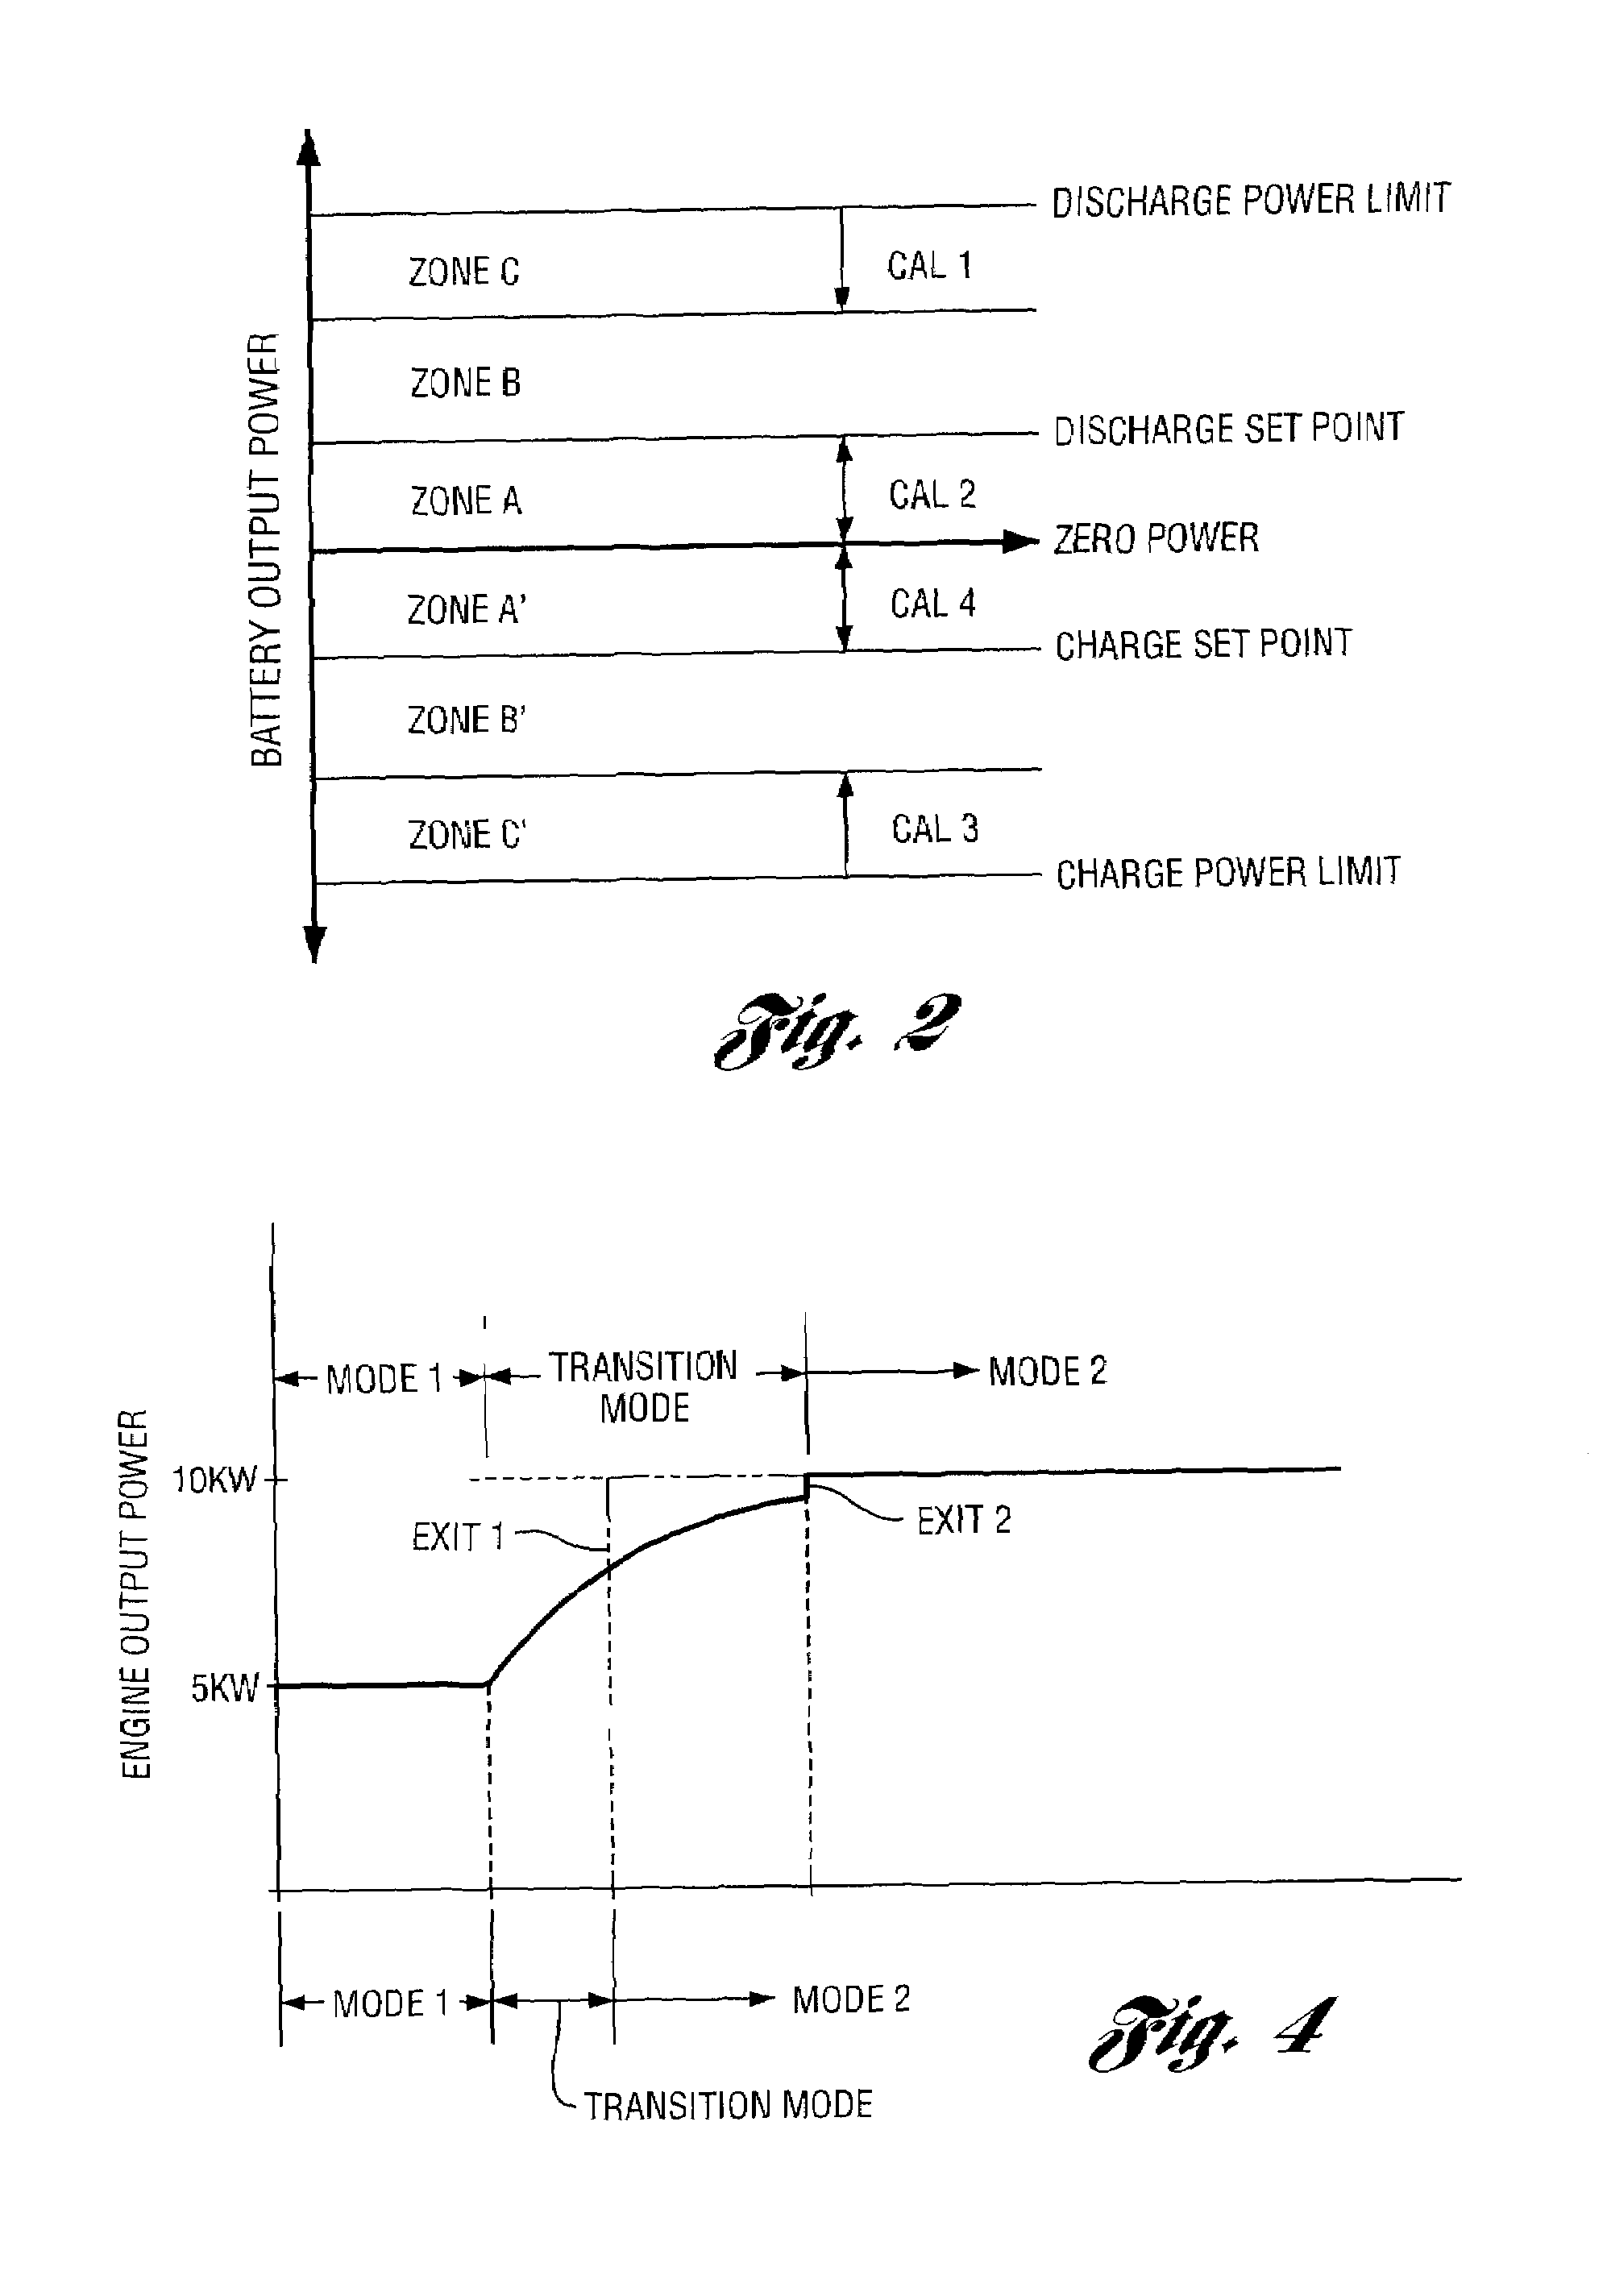 Vehicle and method for operating a vehicle to reduce exhaust emissions